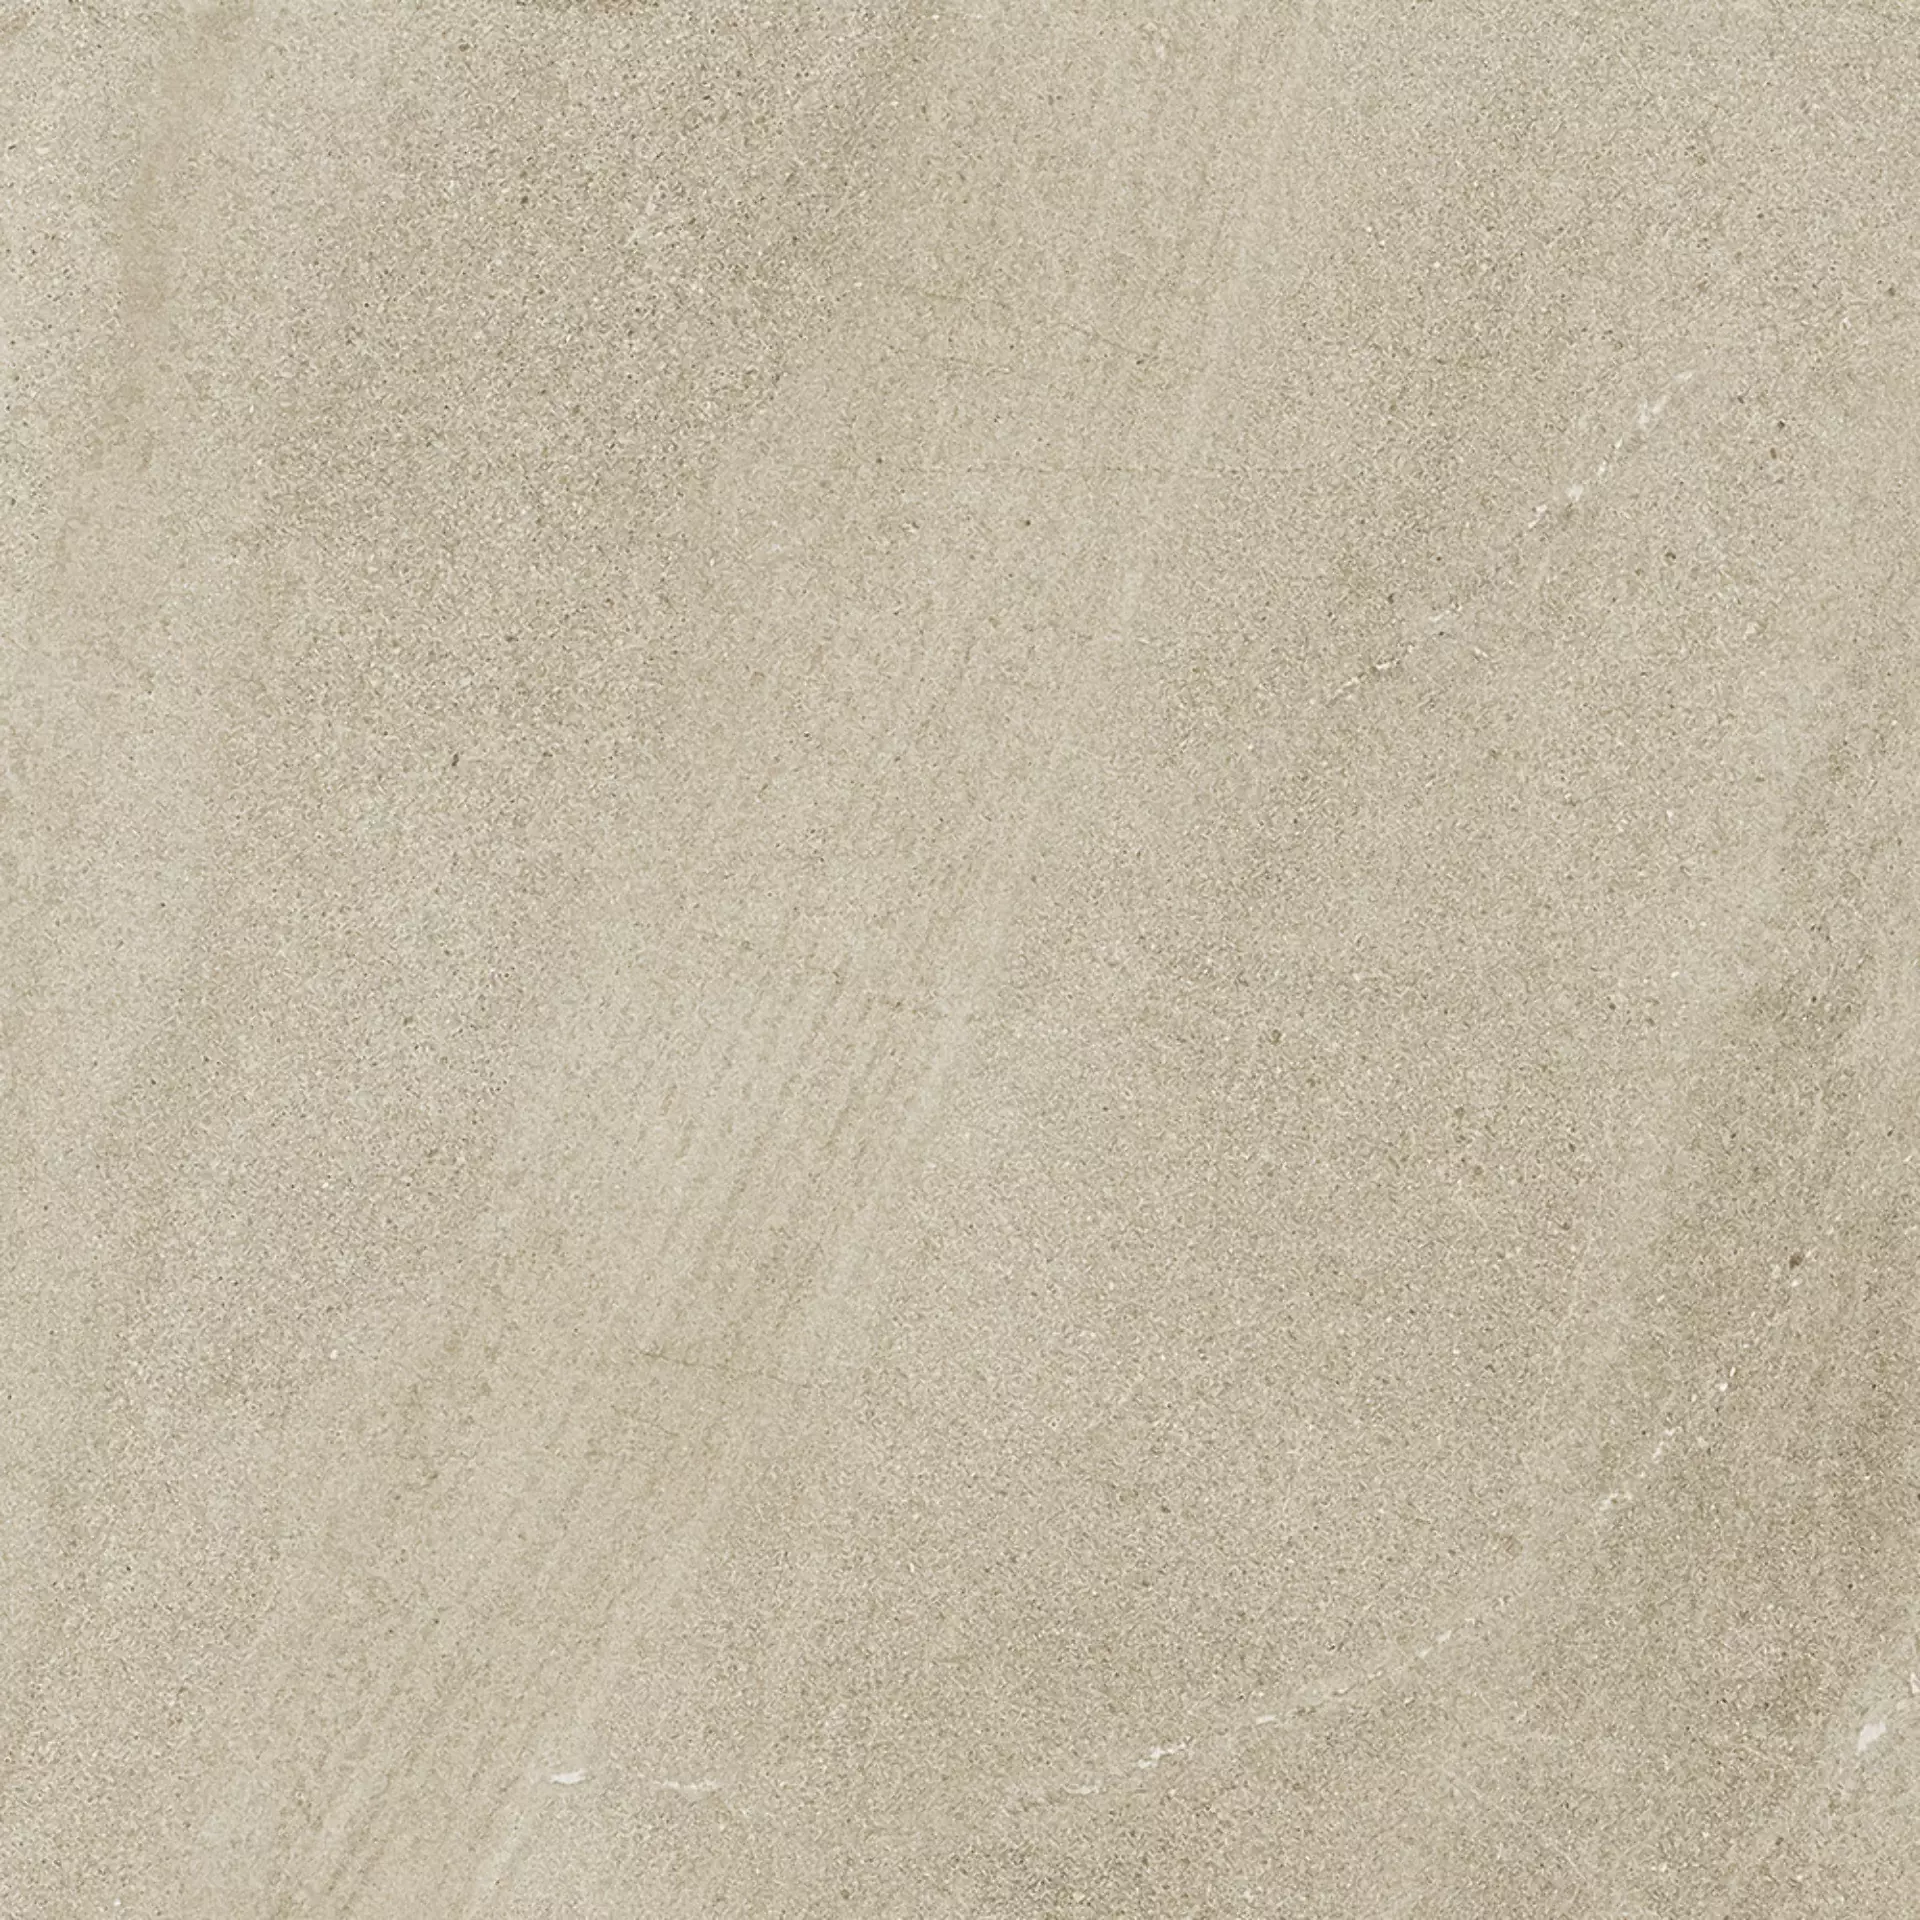 Cottodeste Limestone Amber Blazed Protect EGWLS05 60x60cm rectified 14mm